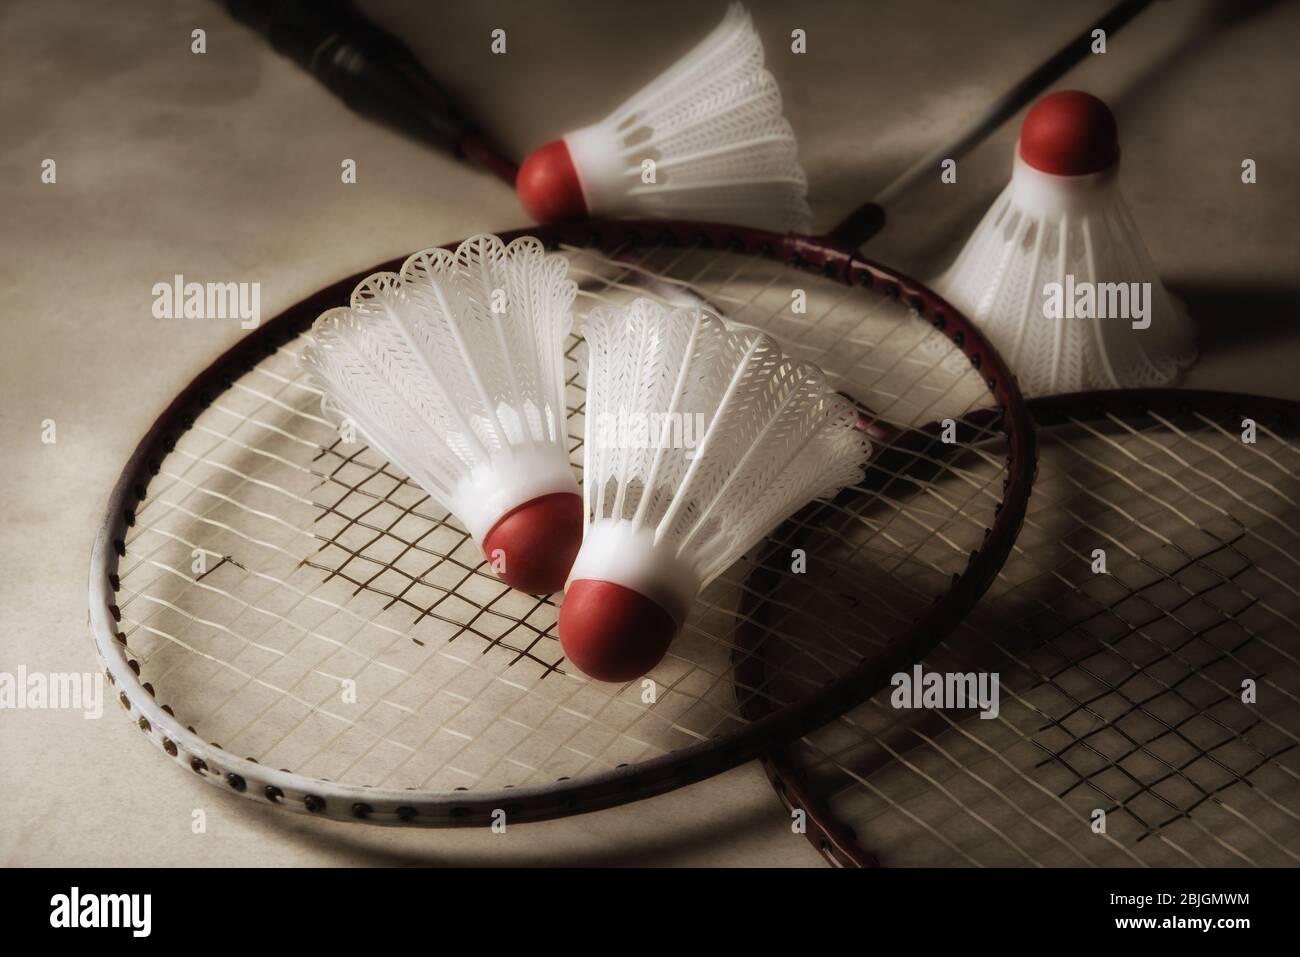 Badminton Still Life: Two rackets and shuttlecocks on gray surface with strong side light. Stock Photo